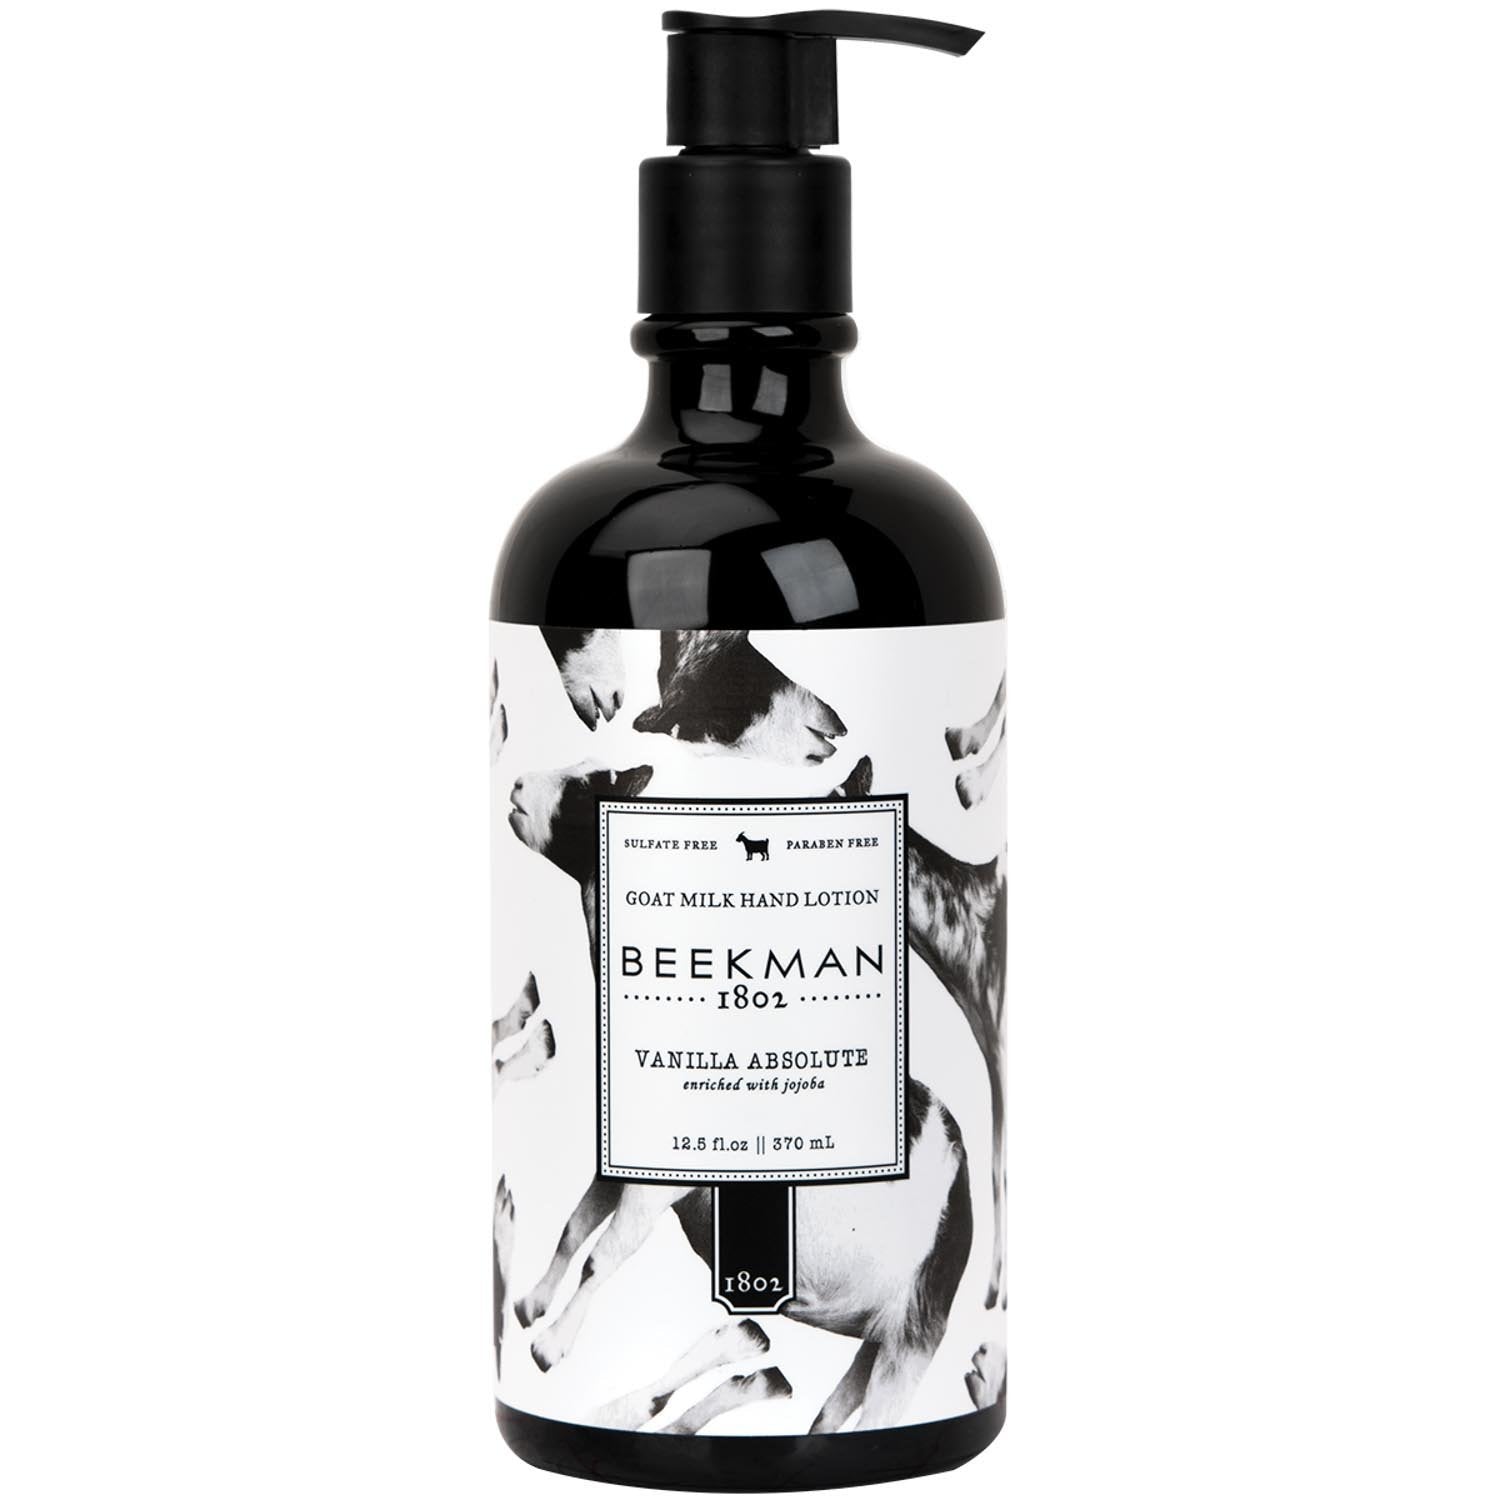 Beekman 1802 Vanilla Absolute Goat Milk Hand Lotion - 12.5 oz. - The Finished Room